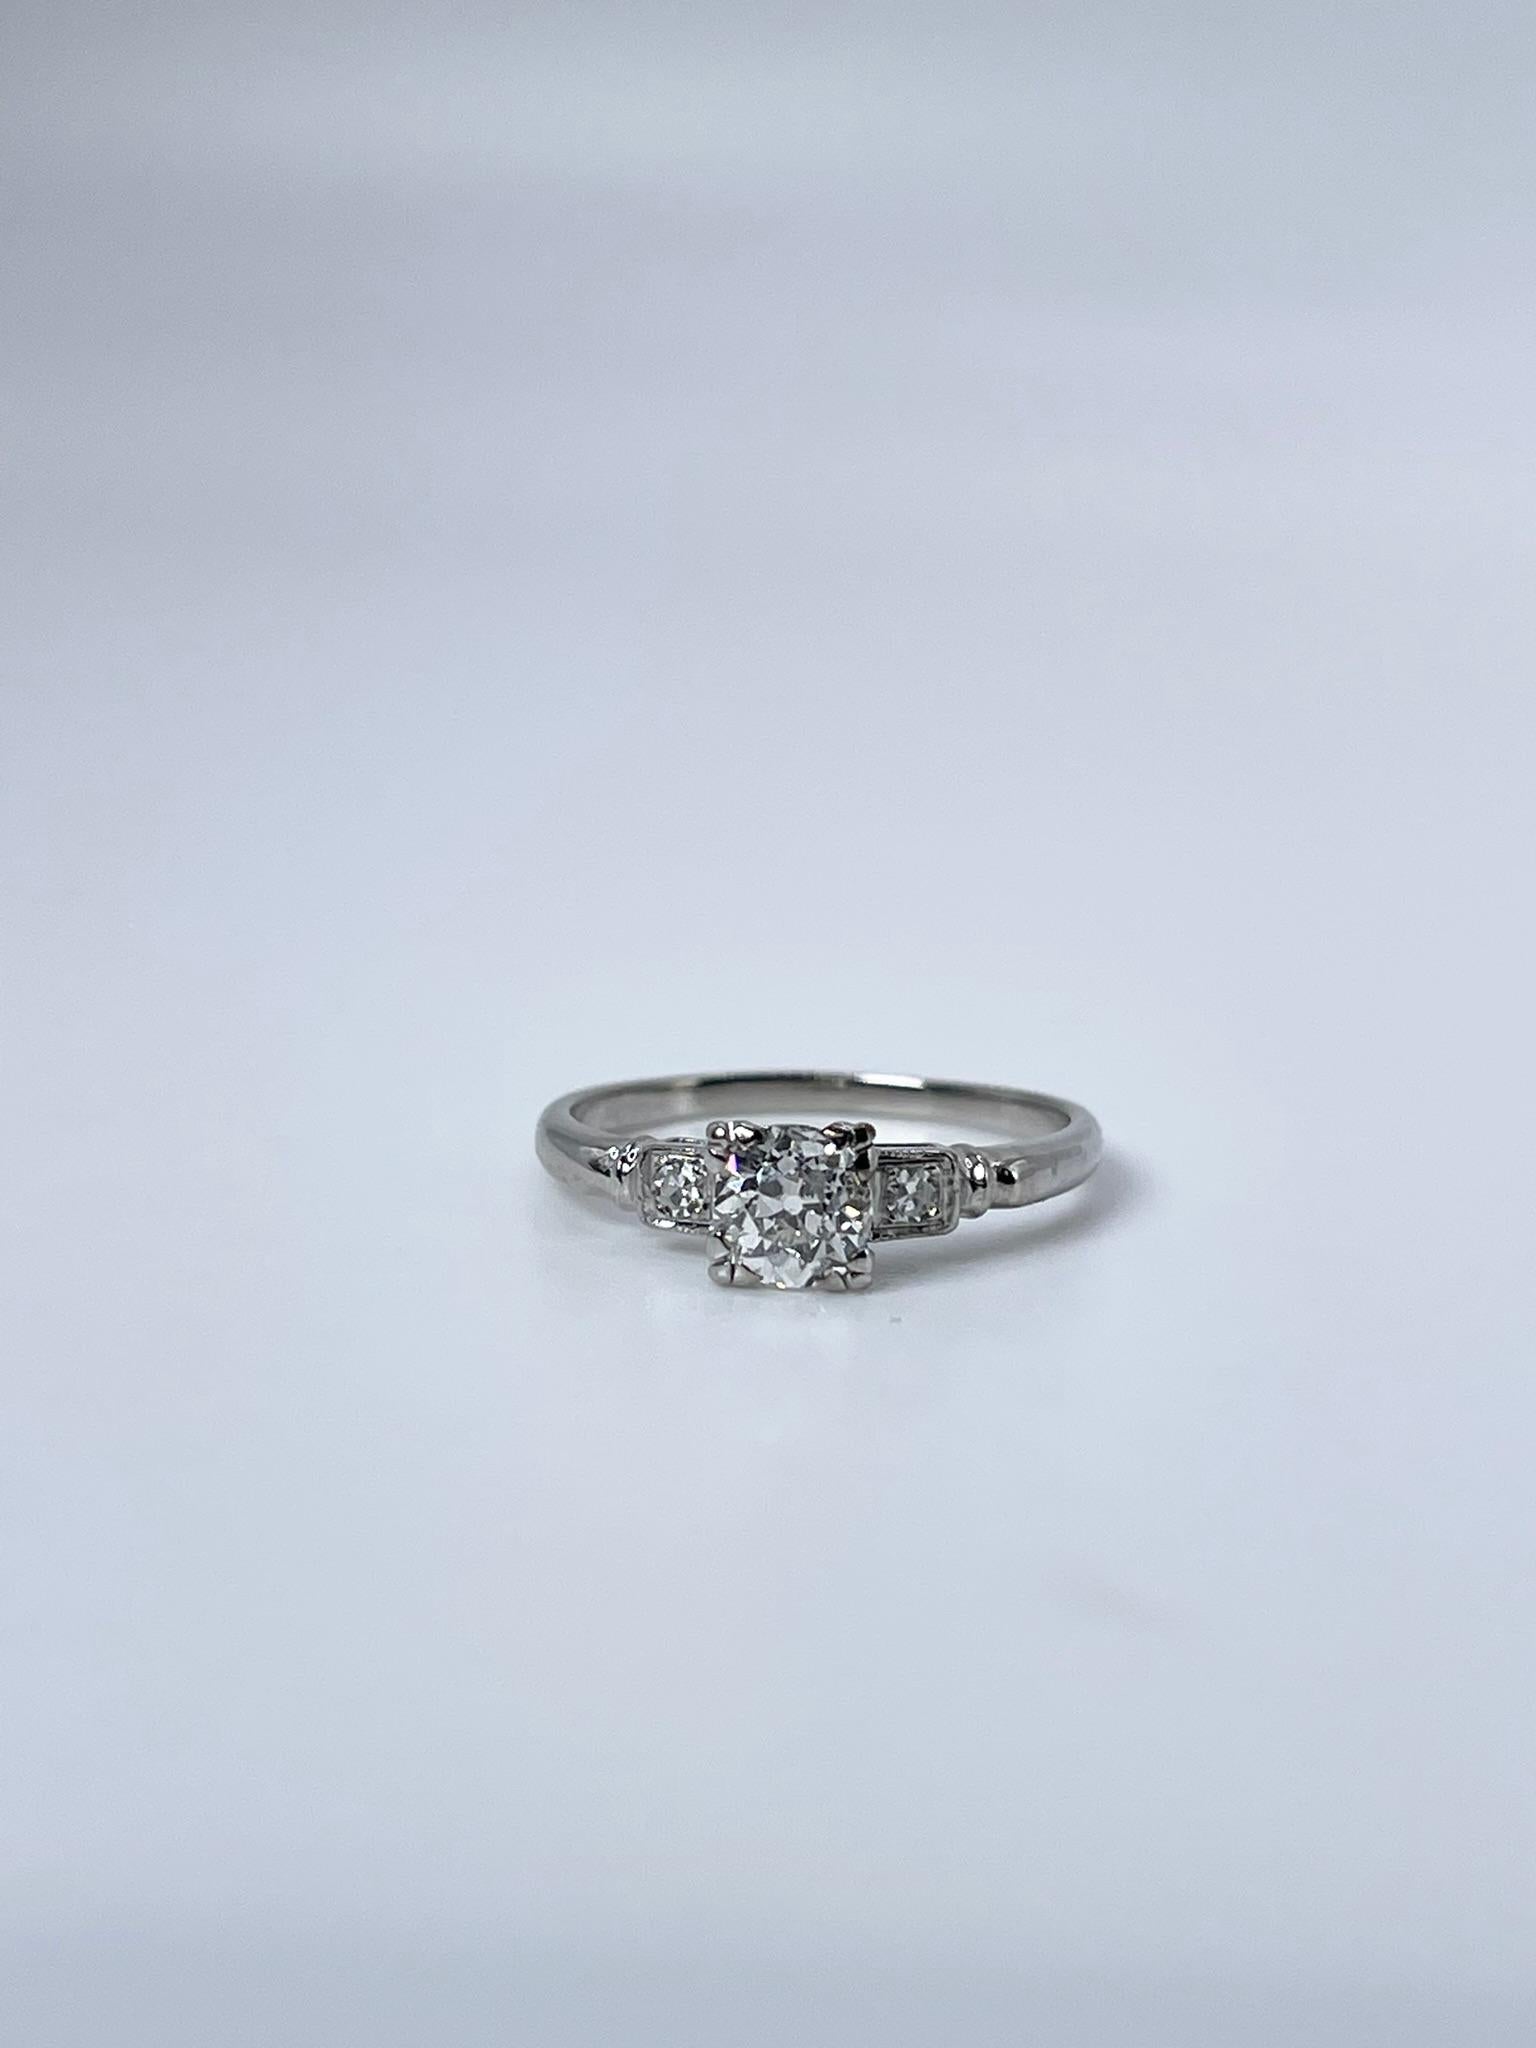 Stunning antique diamond engagement ring made with old minie cut center diamond in 14KT white gold.
ITEM: MMEI 100-00024
GRAM WEIGHT: 2.35gr
METAL: 14KT white gold

NATURAL DIAMOND -center
Cut: Old Mine
Color: F
Clarity: VS2 
Carat: 0.55ct

NATURAL